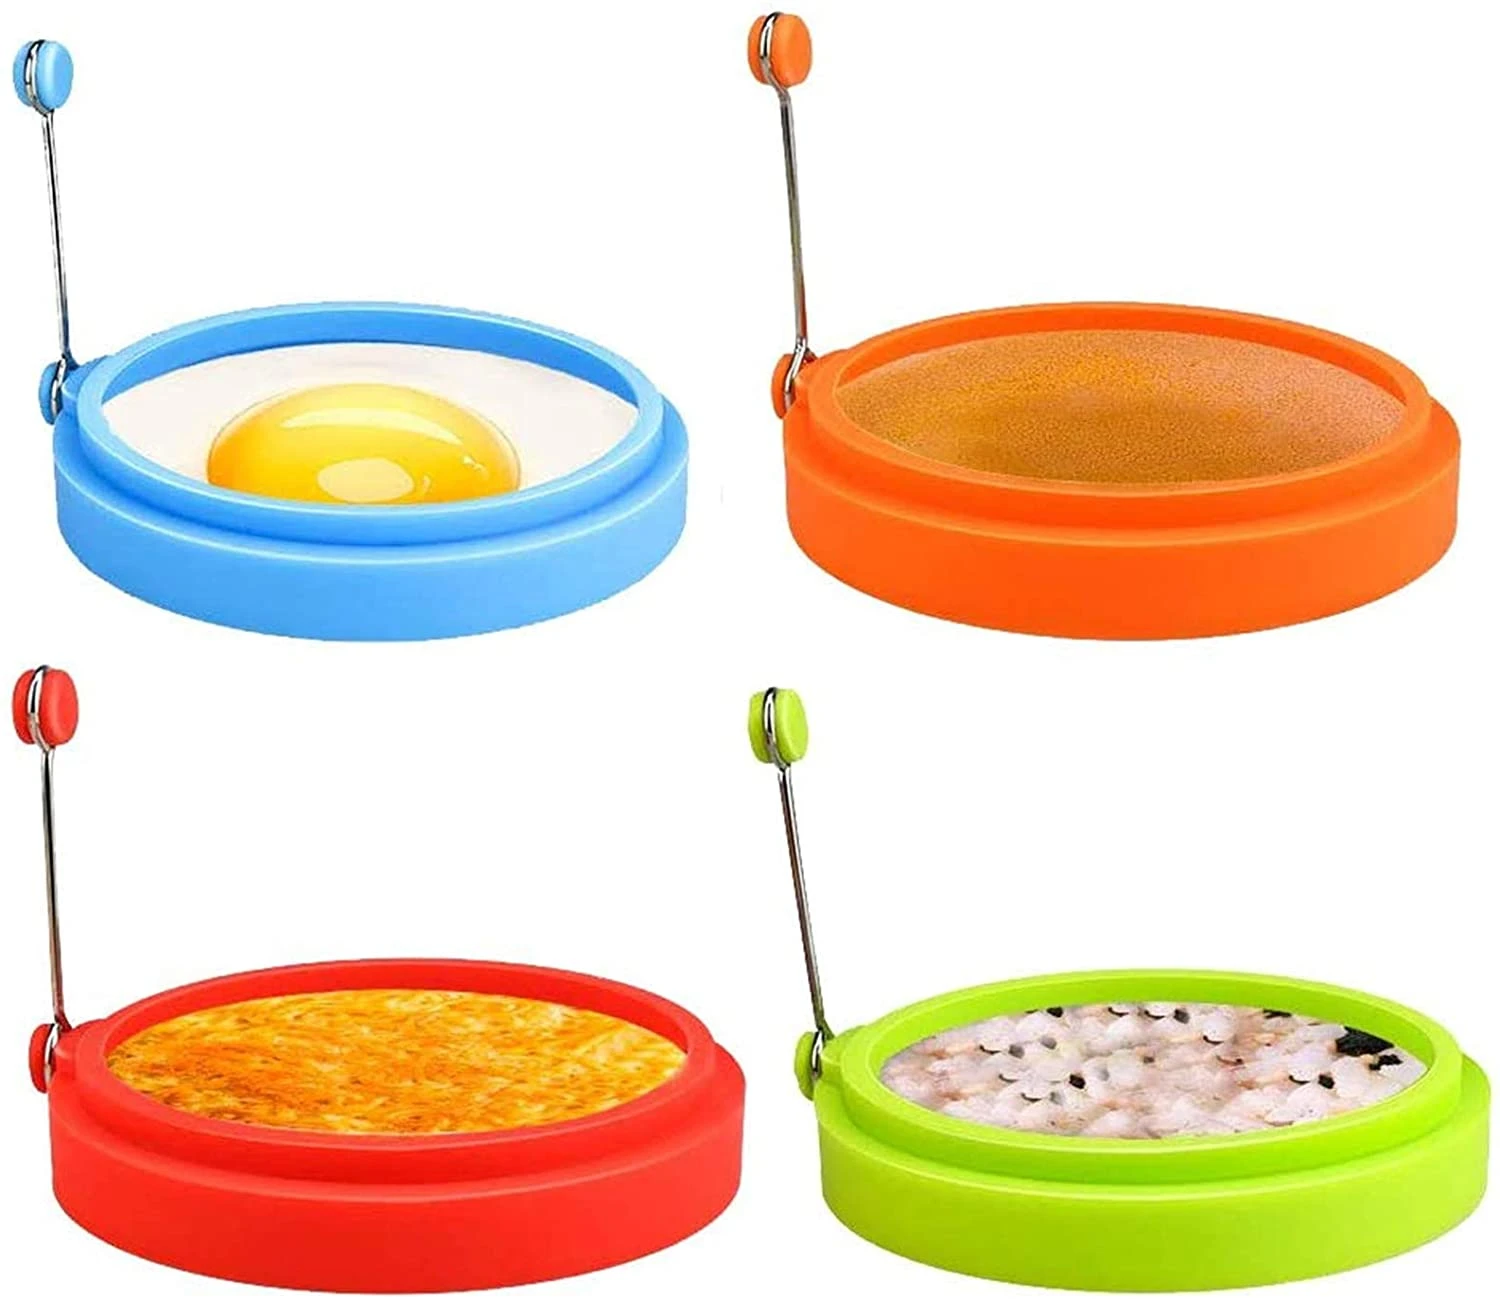 Food grade silicone round shape with handle high temperature kitchen baking mold omelette ring Egg Tools